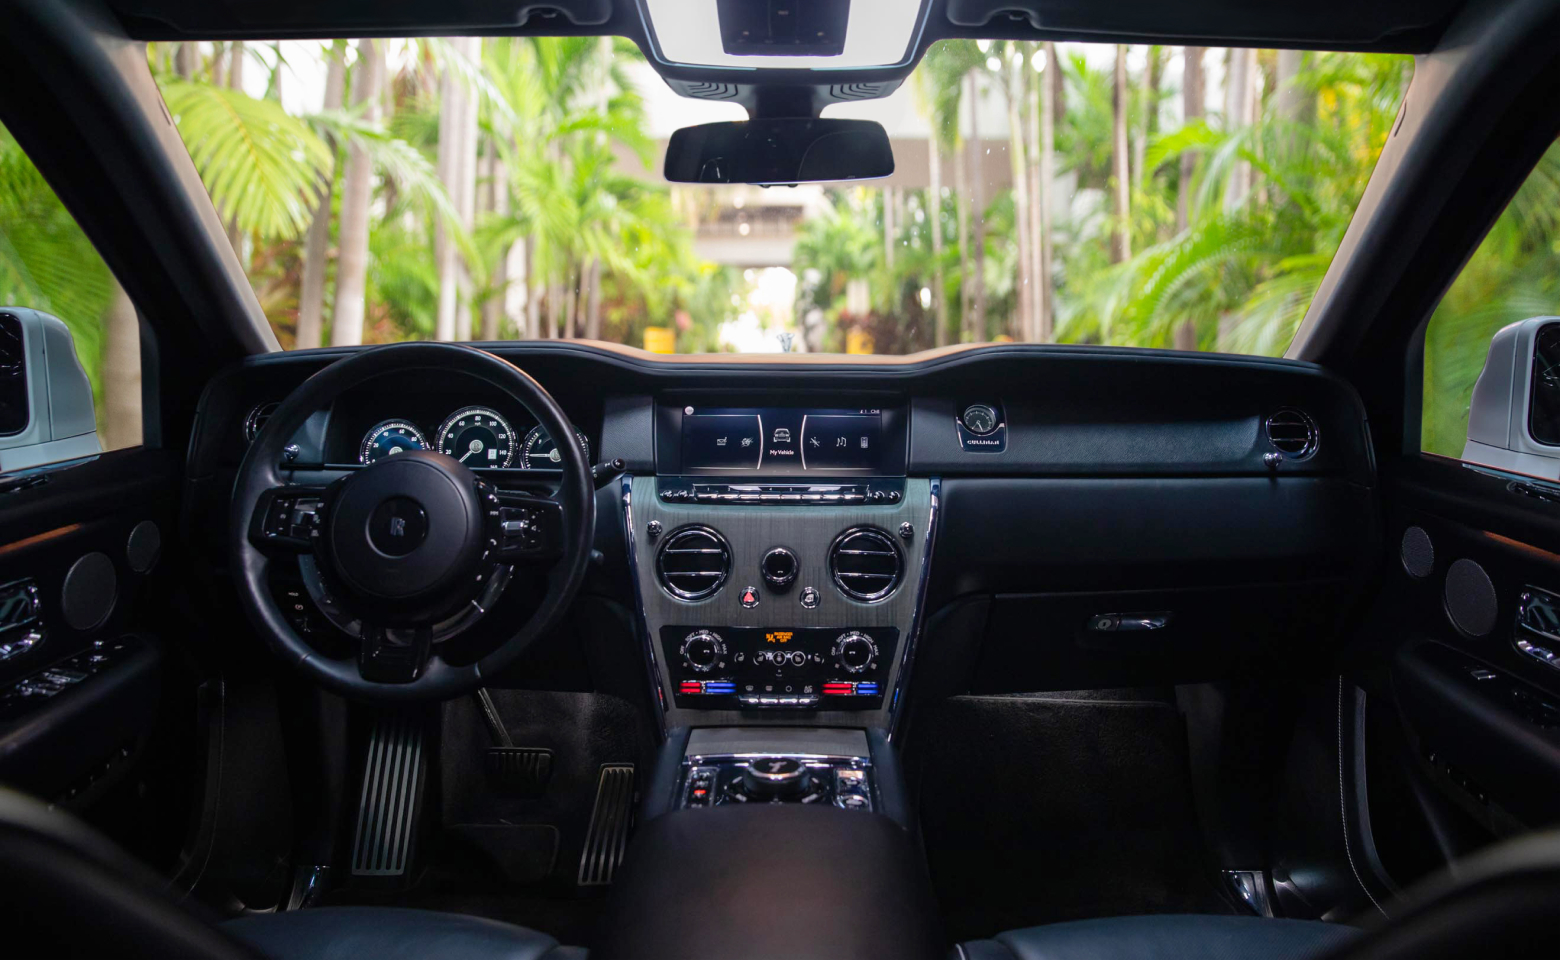 Interior view of a luxury vehicle available for rent from RealCar car rental in Miami, showcasing plush leather seats, advanced dashboard features, and refined interior detailing